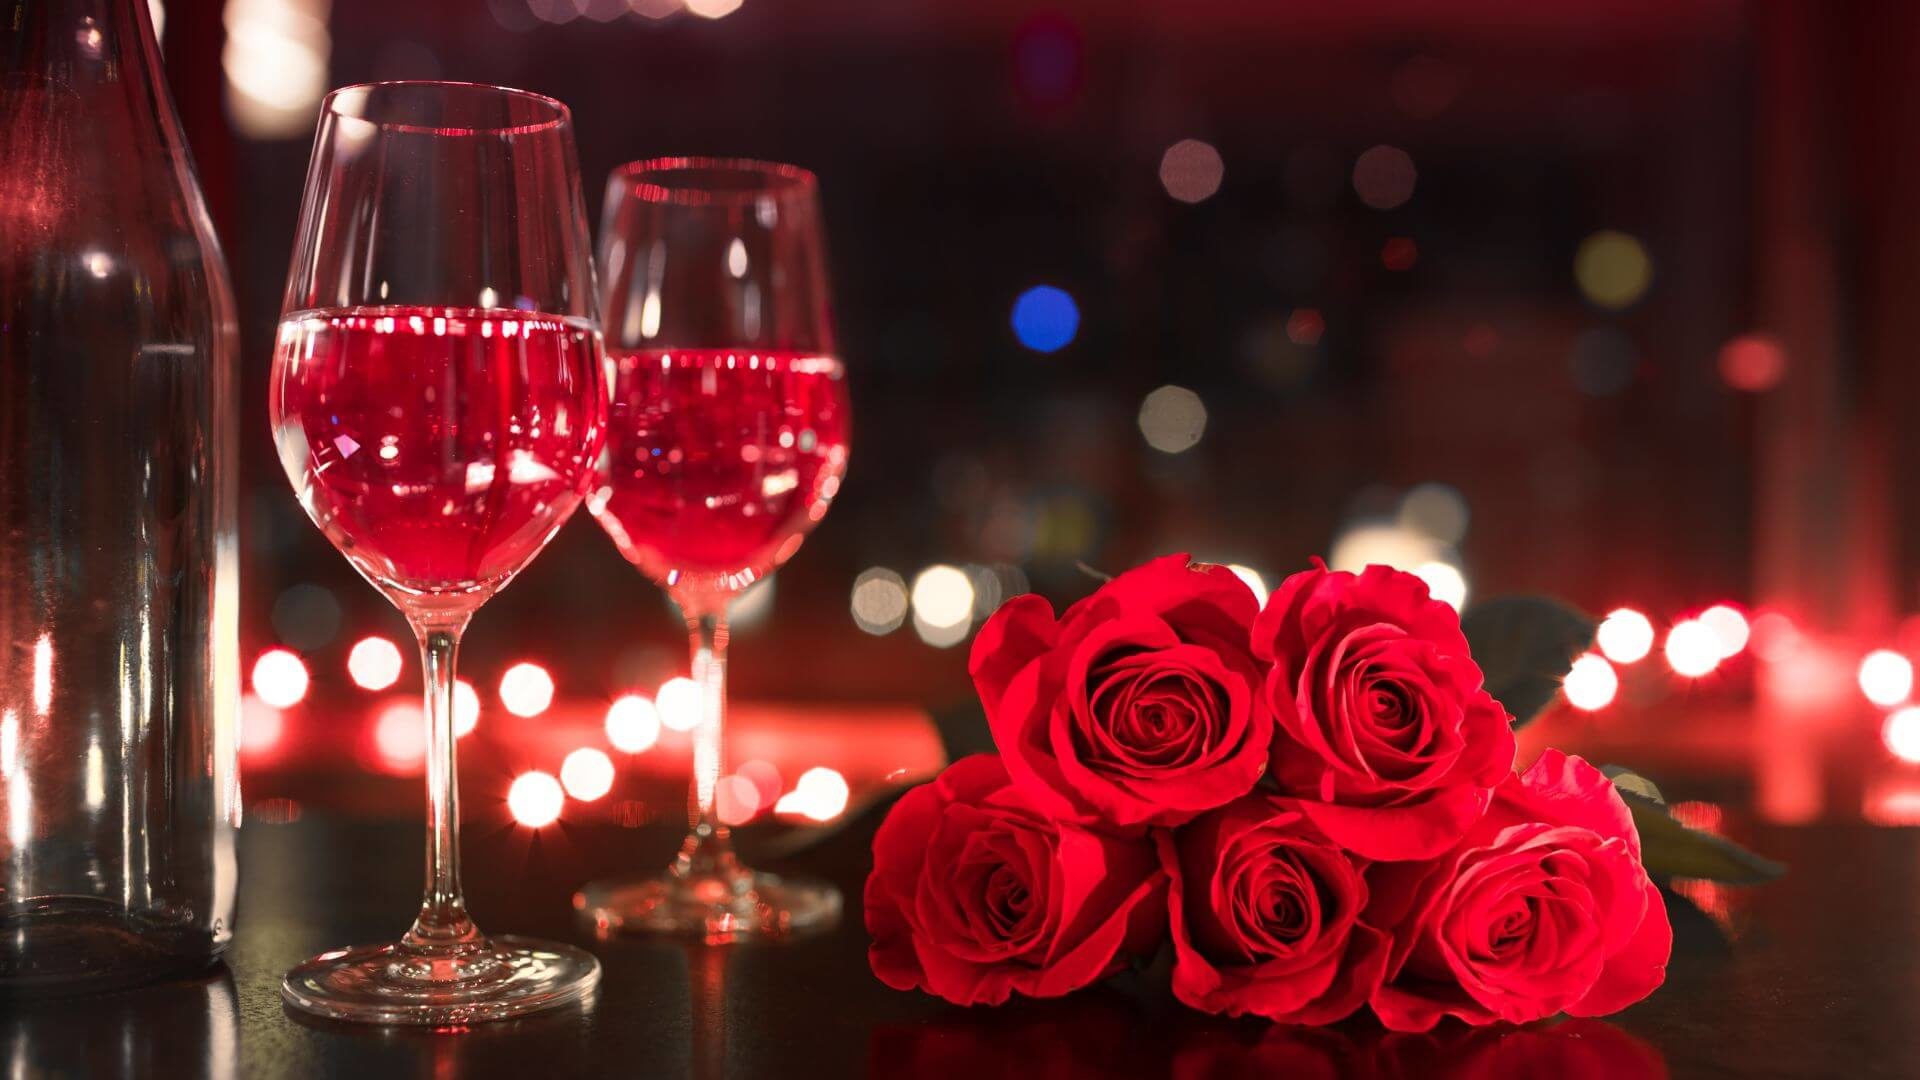 Filled wine glasses by bottle with red roses laying on table in dimly lit room.